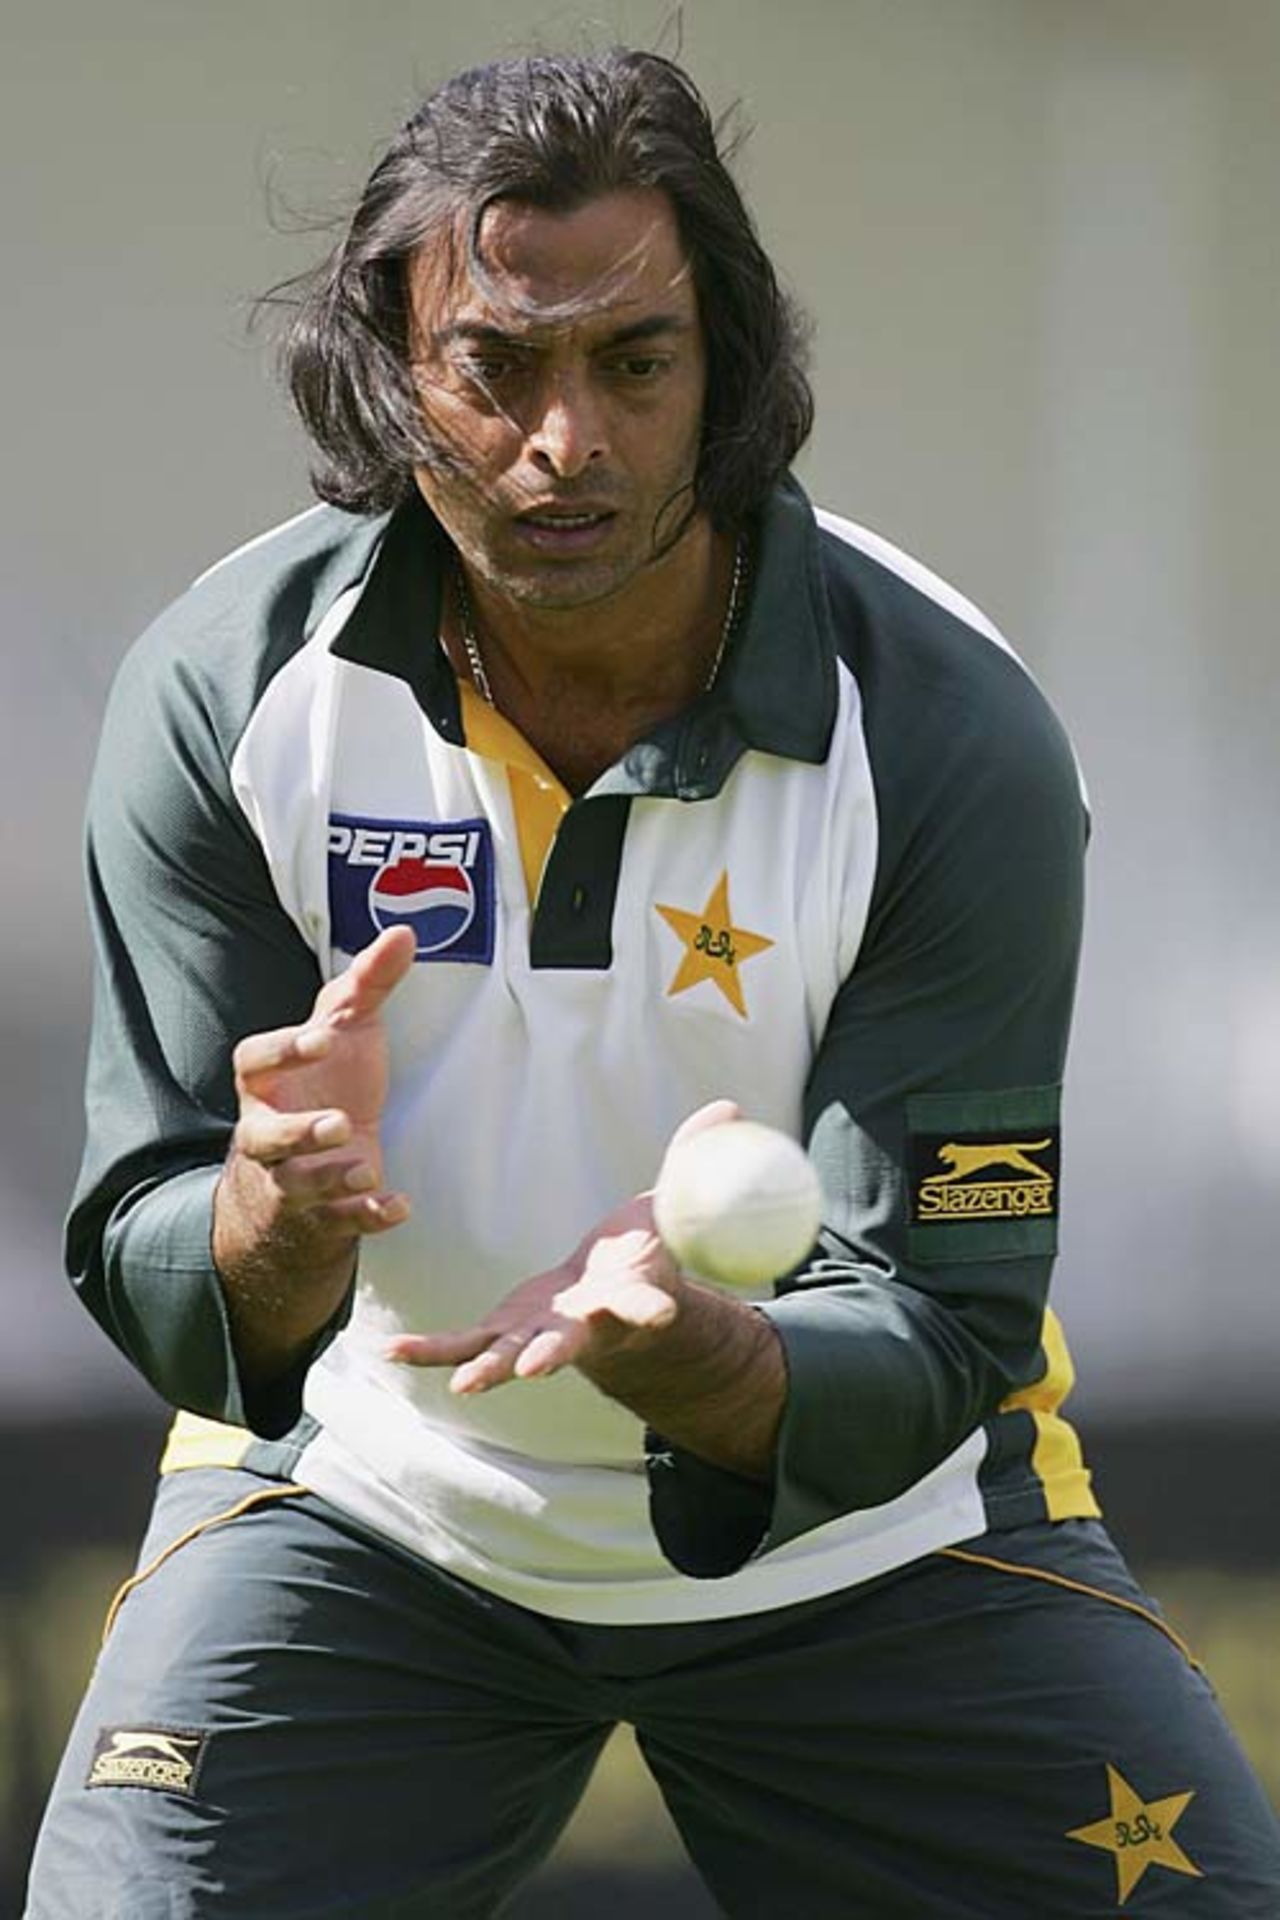 Shoaib Akhtar keeps his eye on the ball in the nets ahead of tomorrow's fourth one-dayer against England, Trent Bridge, September 7, 2006